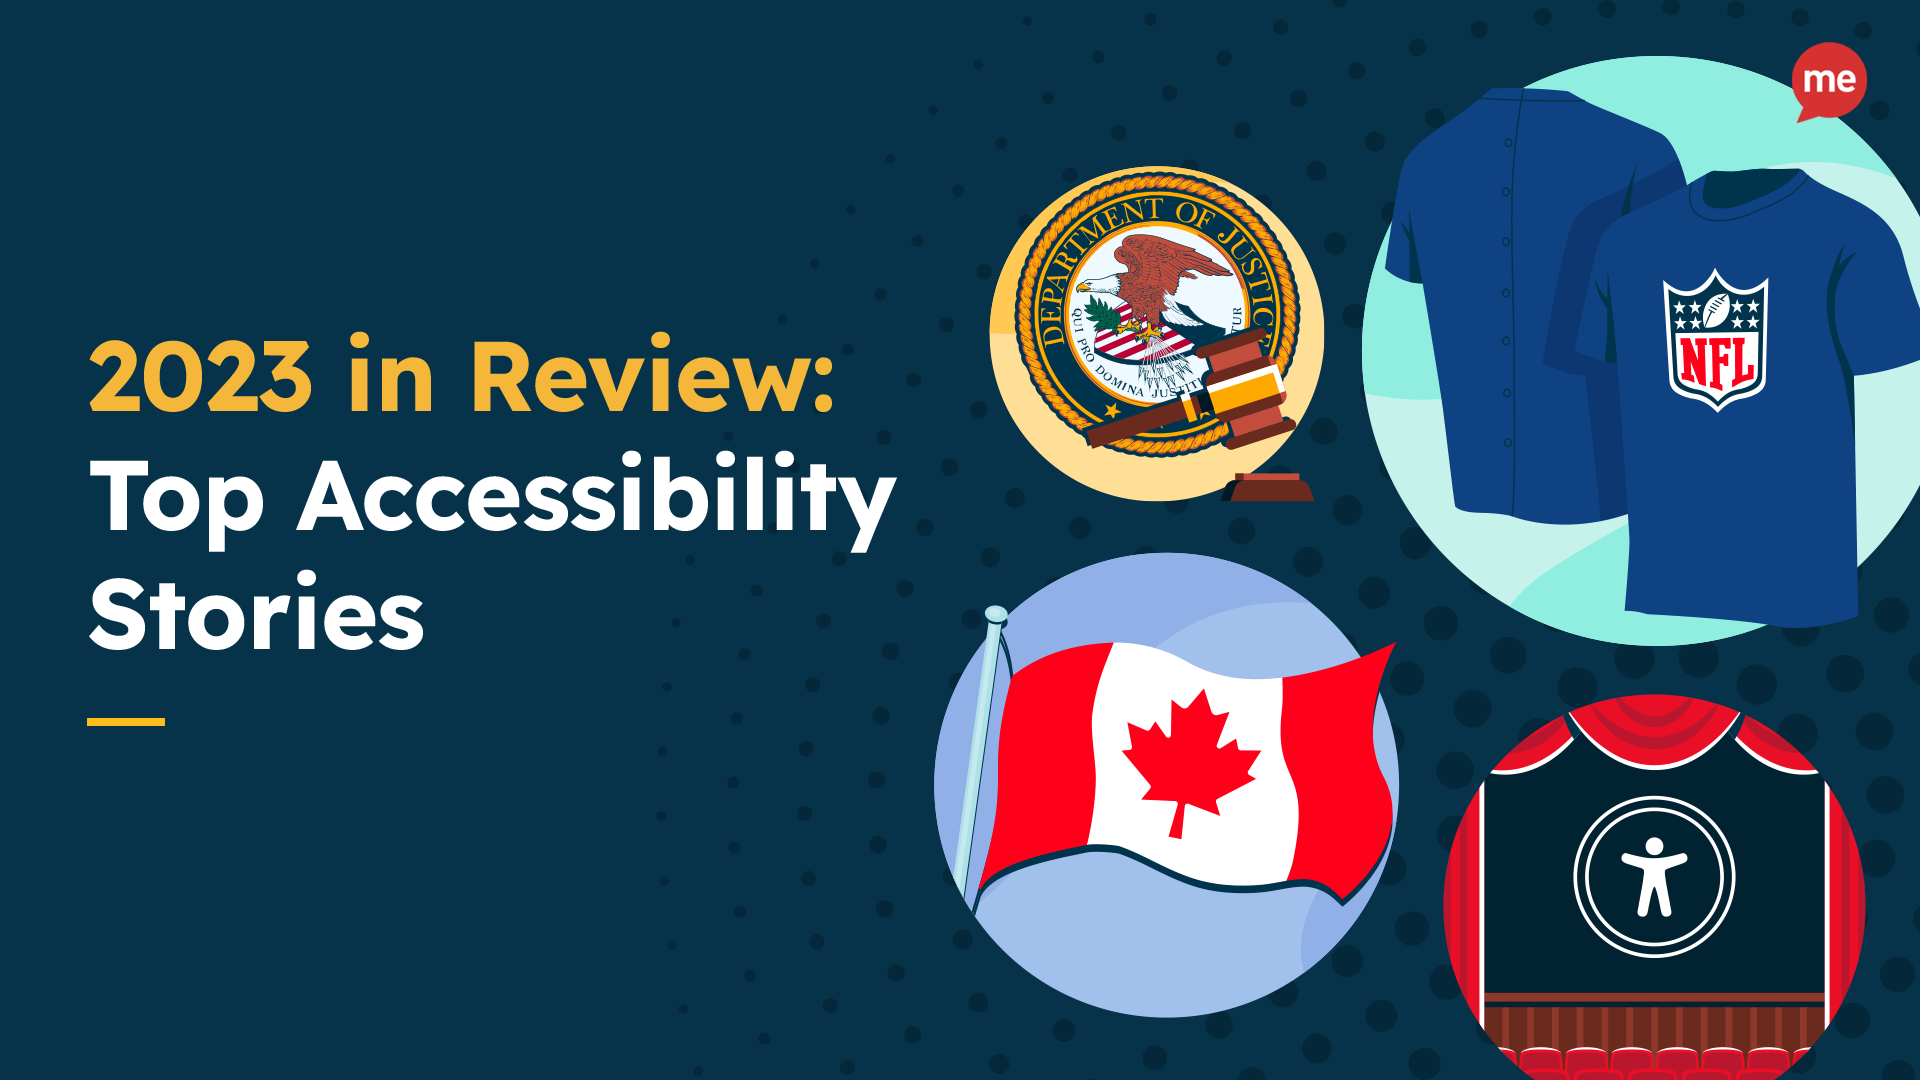 2023 in Review: Top Accessibility Stories